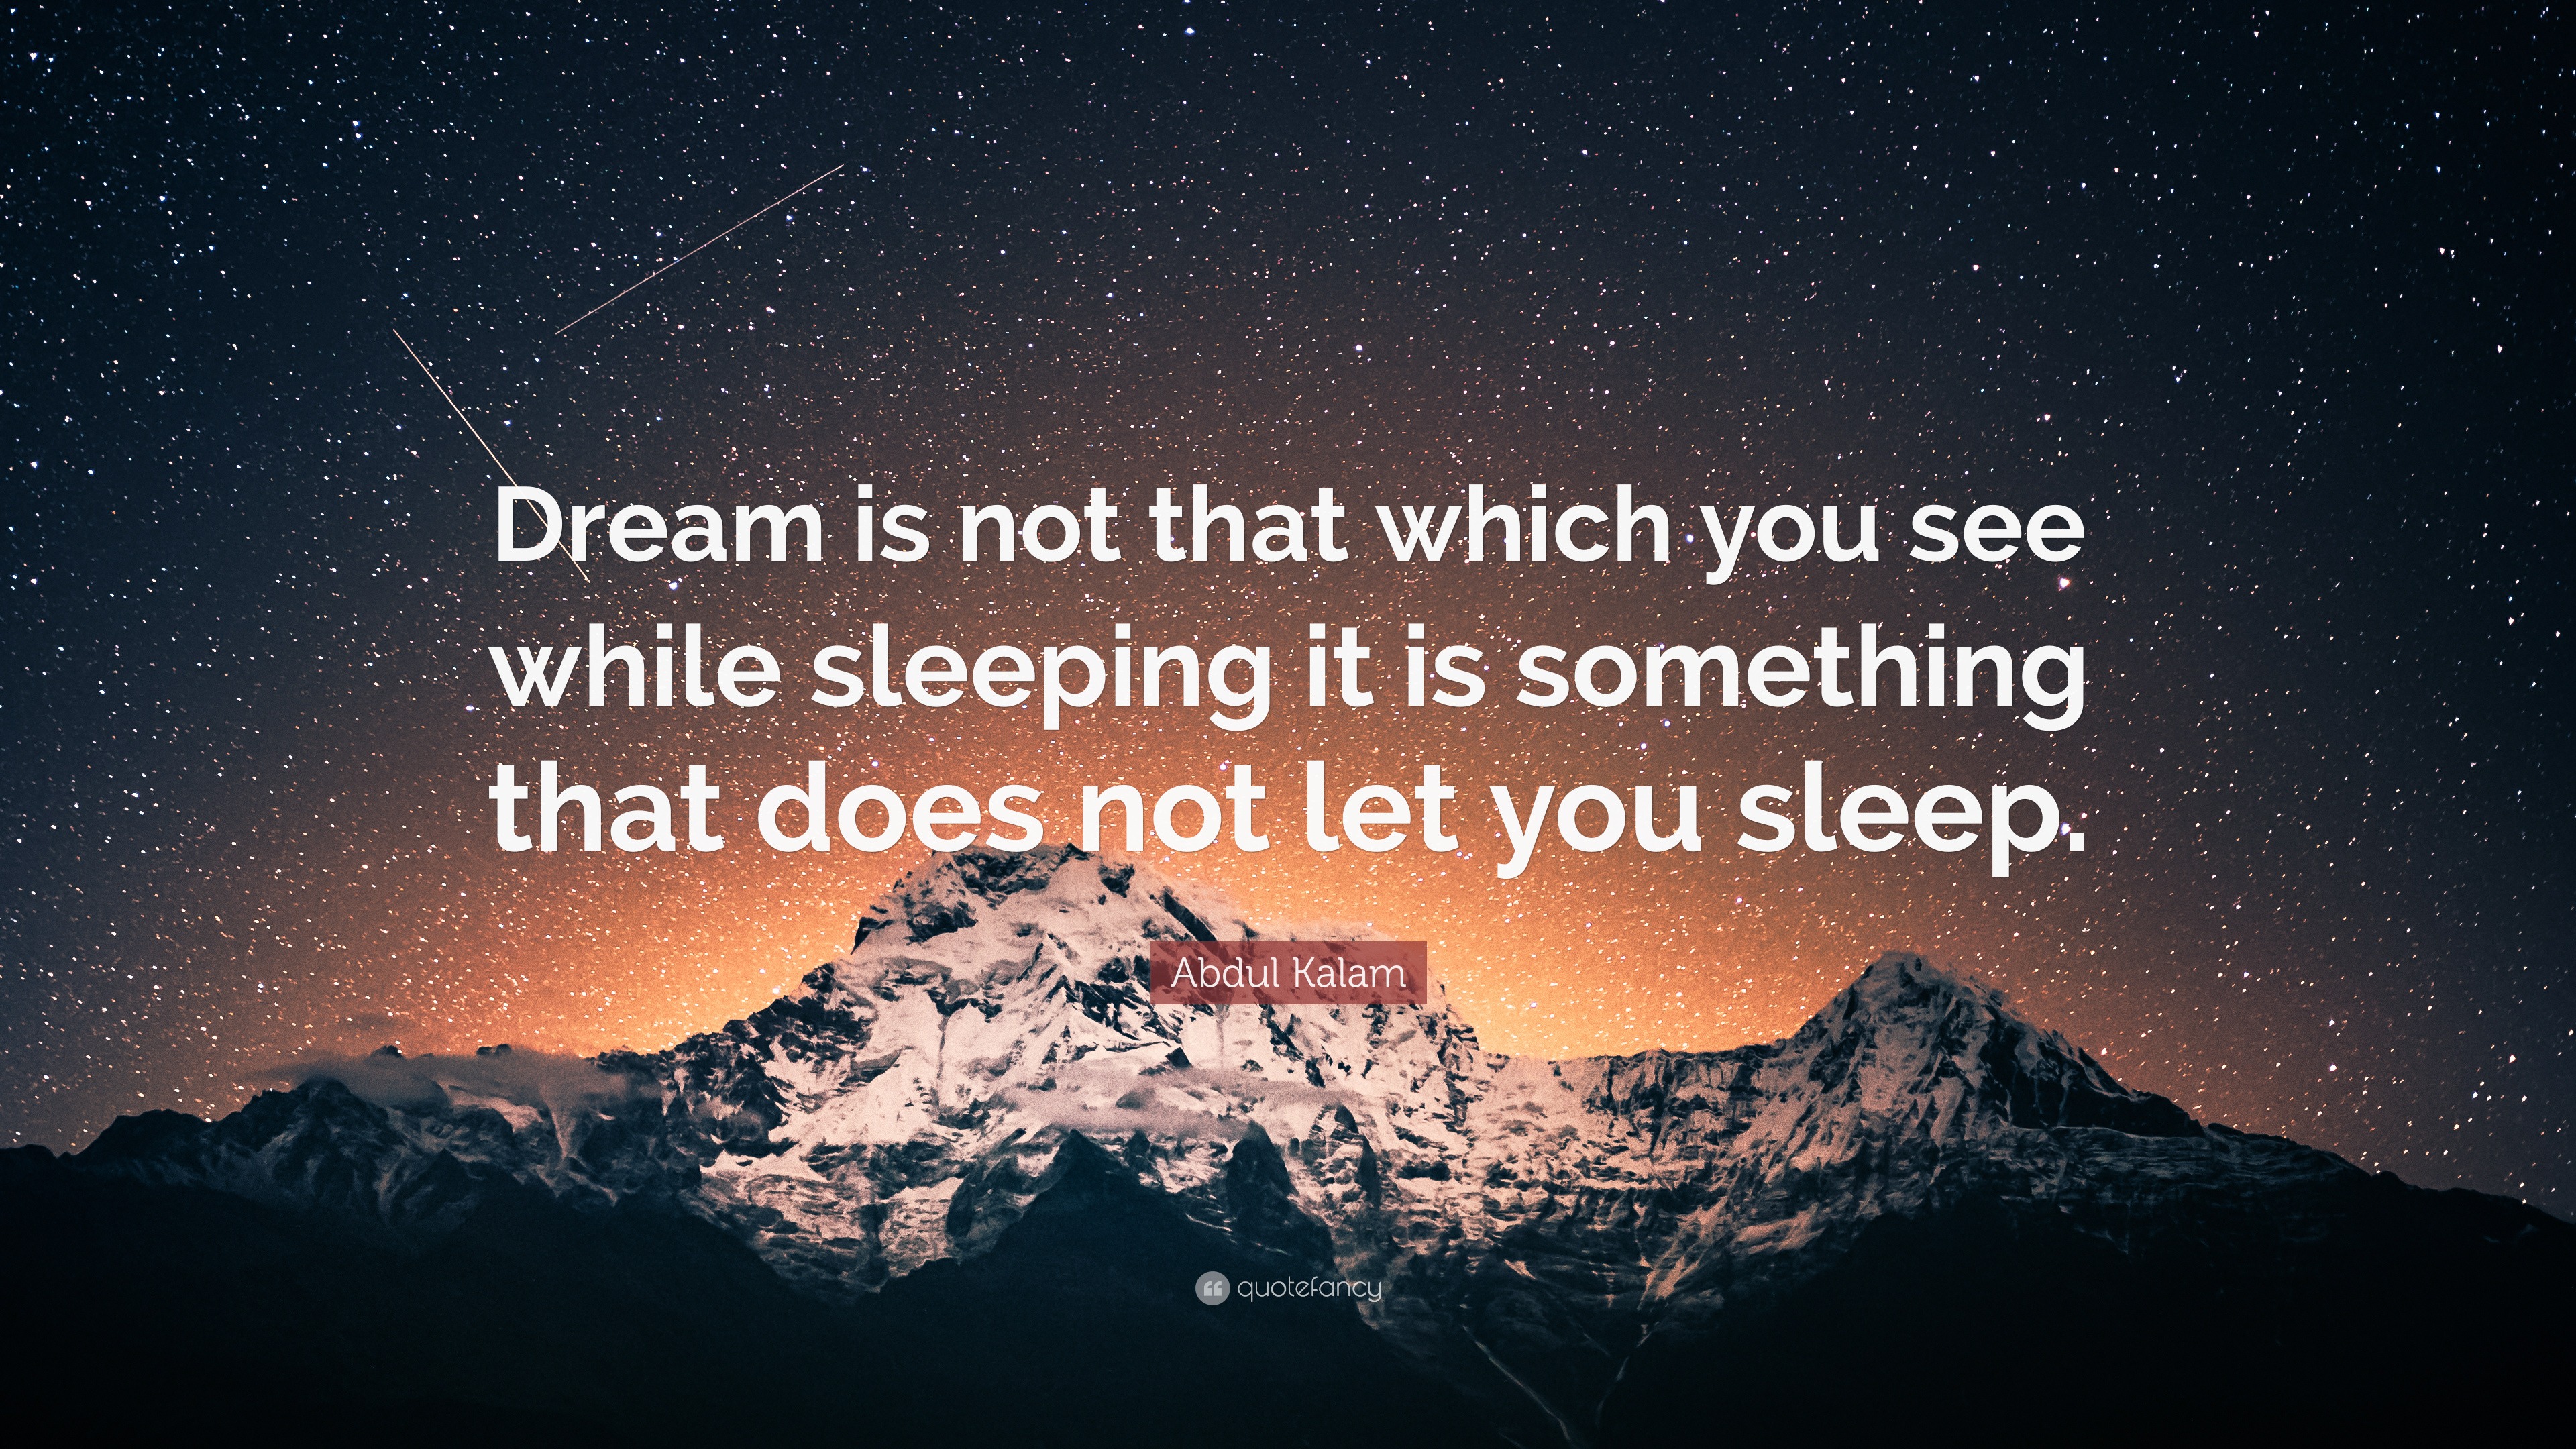 Abdul Kalam Quote: “Dream is not that which you see while sleeping it ...